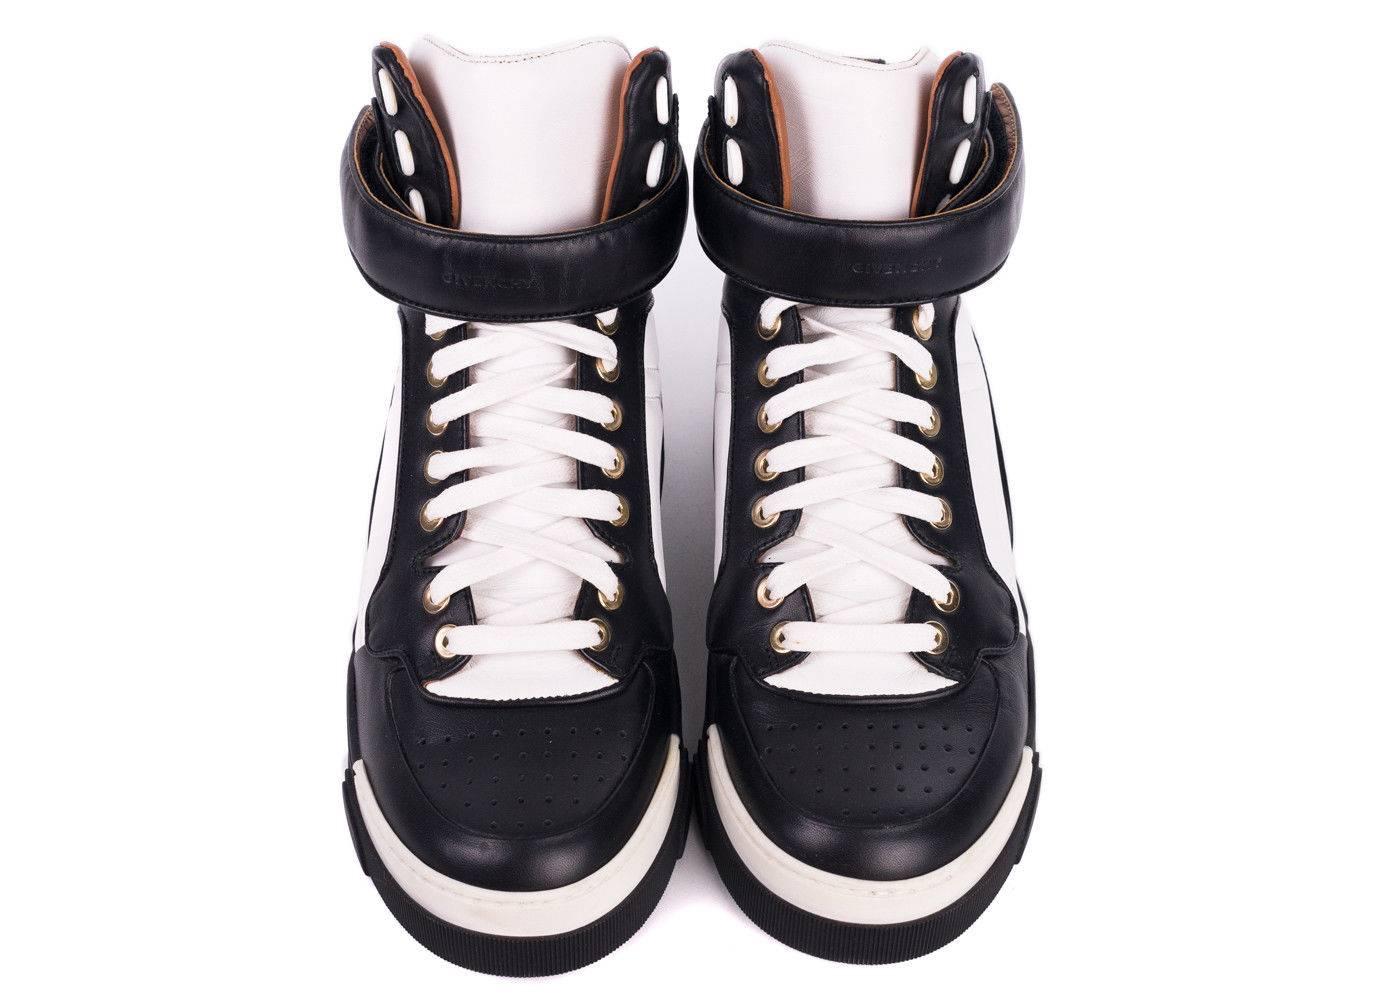 Givenchy's Tyson Colorblock Sneaker is this season's must have. This high top sneaker features Givenchy's signature logo engraved strap , genuine black and white colorblocked leather. You can pair these sneakers with leather pants and a moto jacket